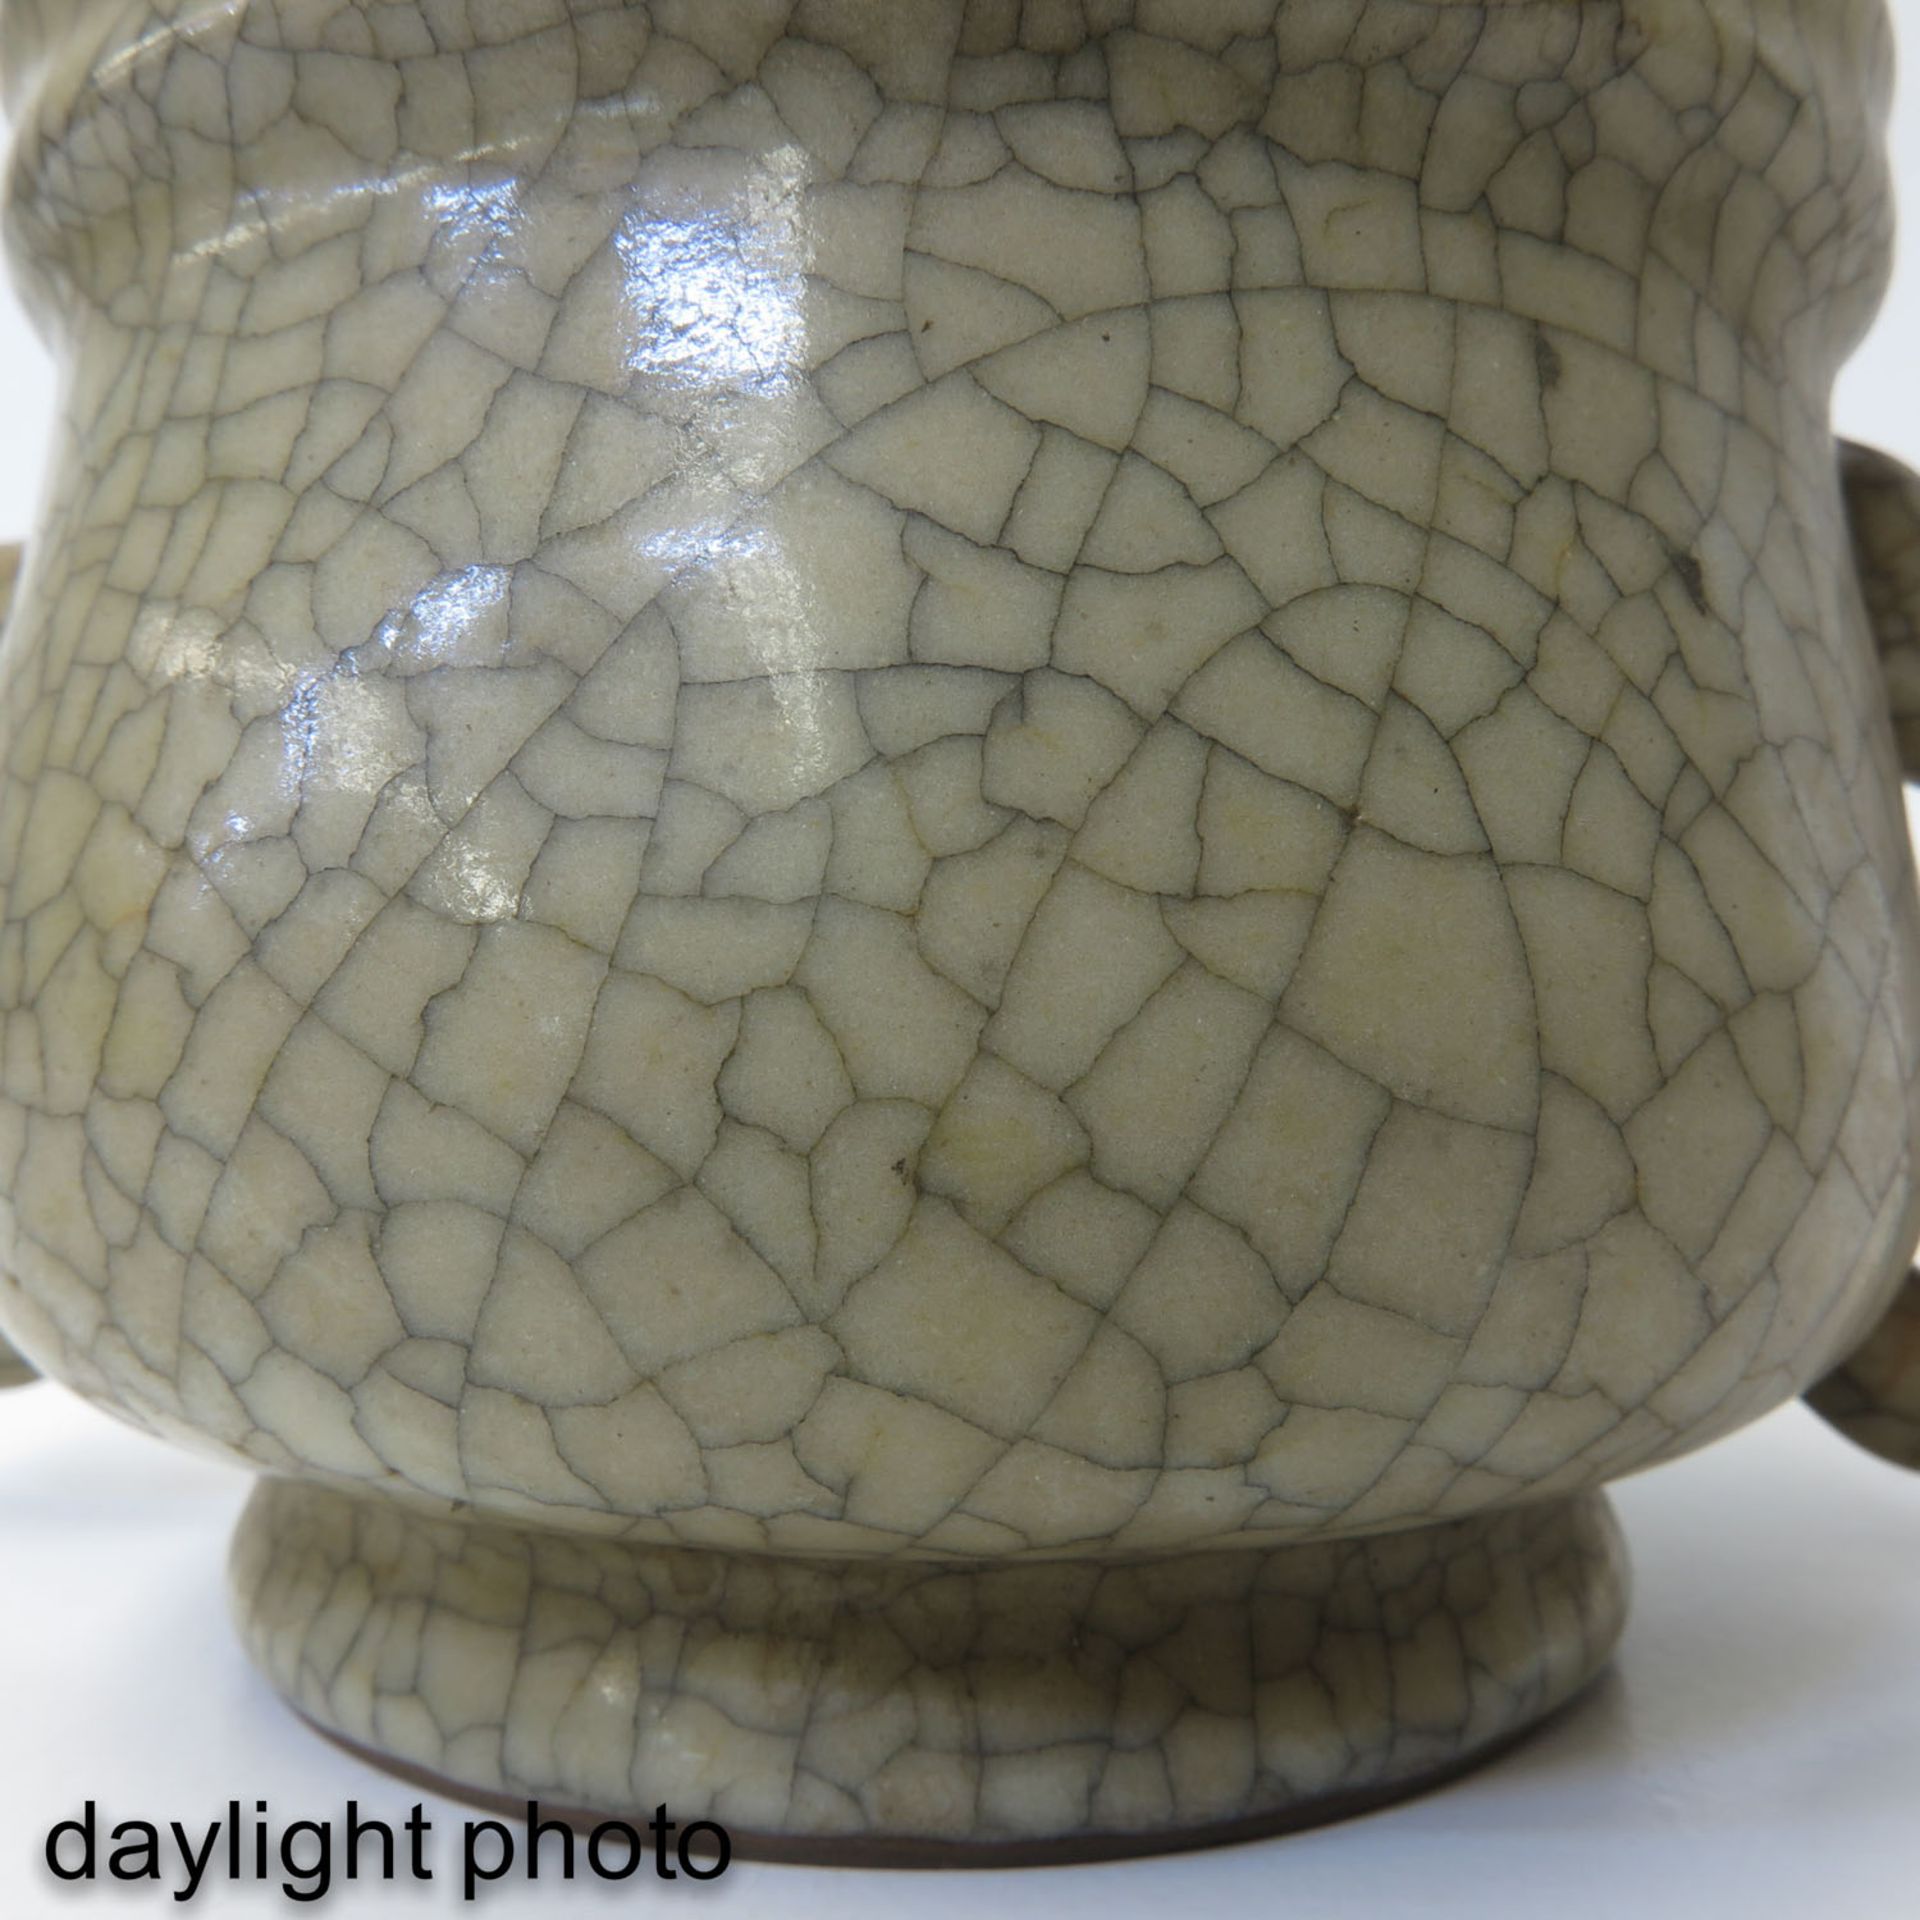 A Crackle Decor Vase with Handles - Image 9 of 9